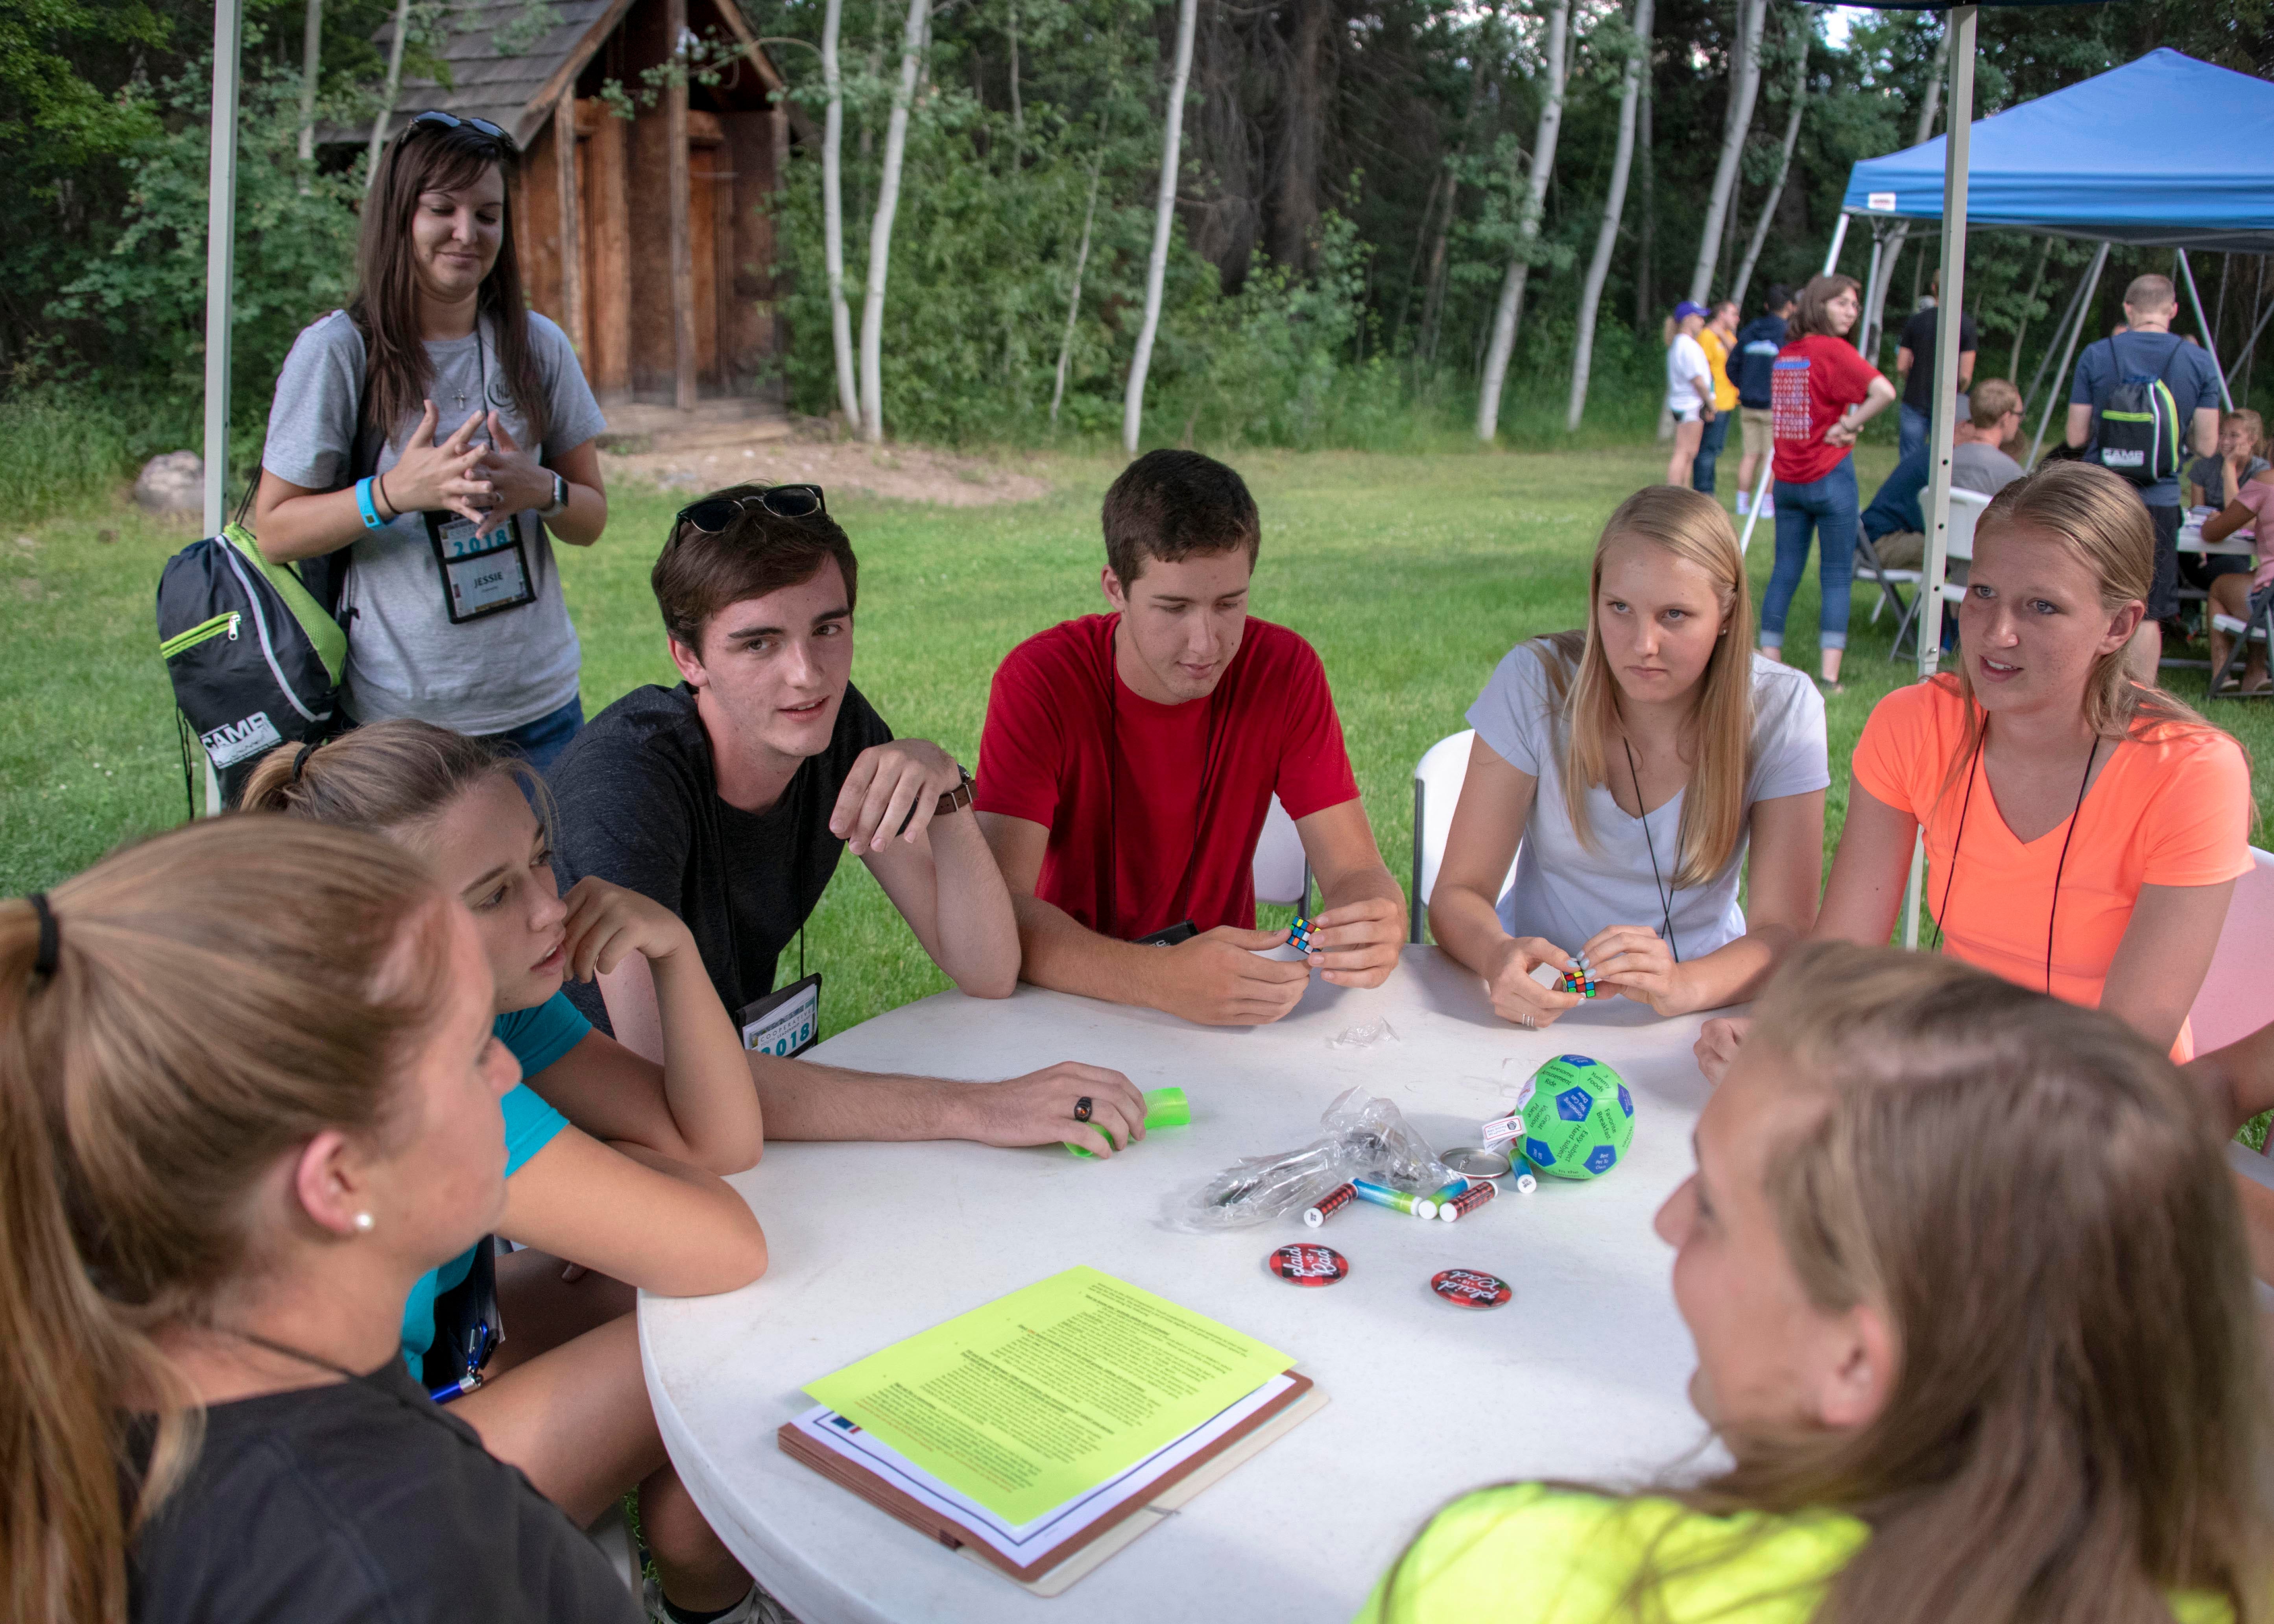 Campers sitting around a round table discussing their newly formed candy cooperative